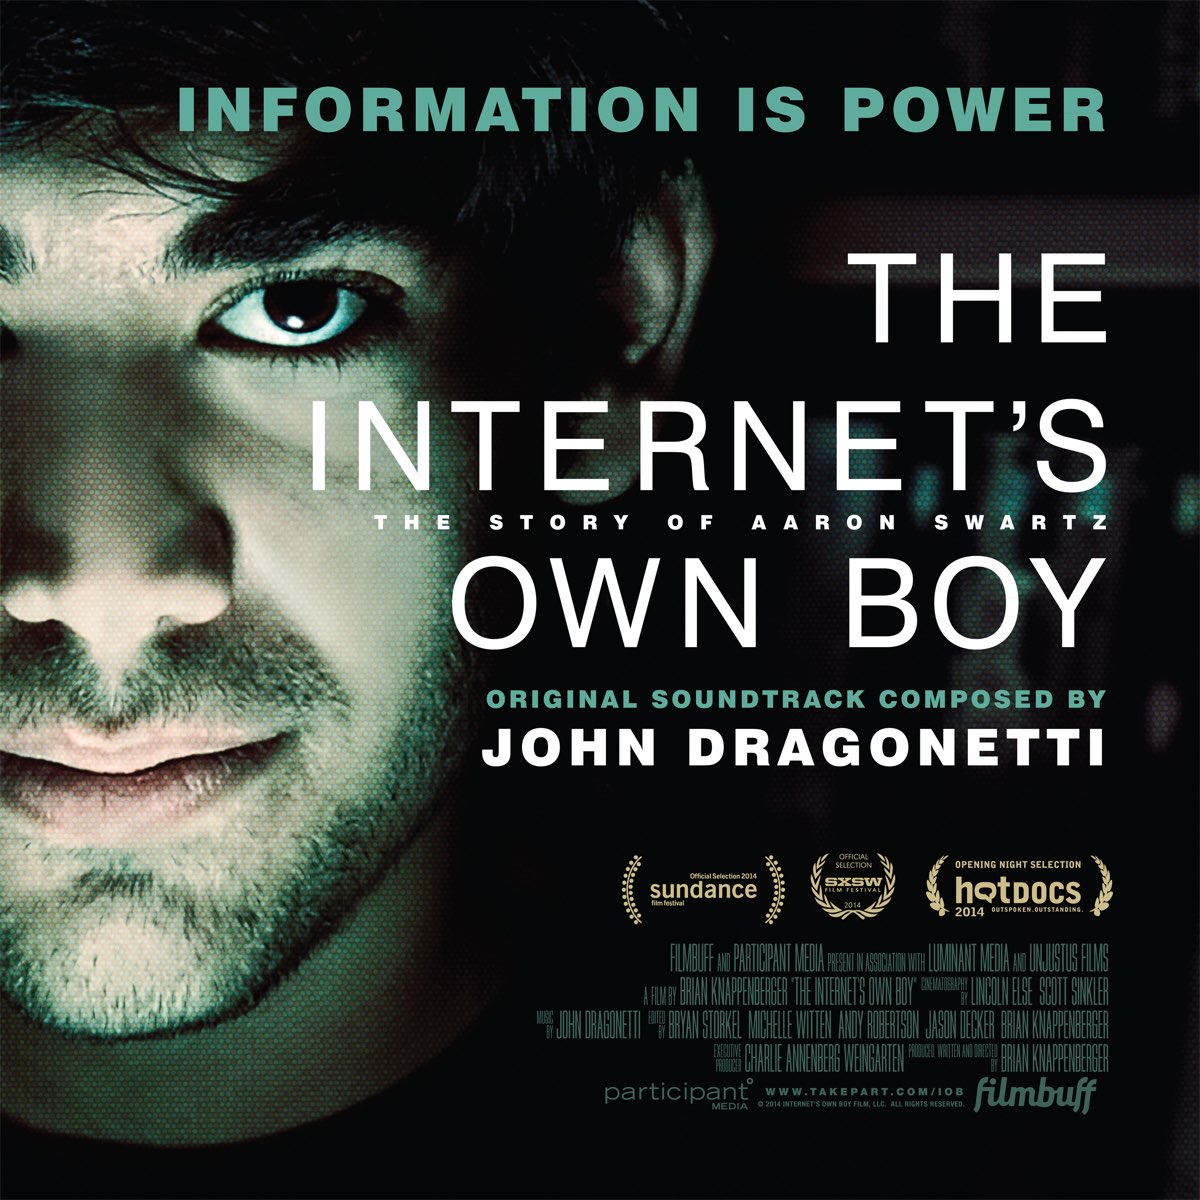 Own boy. The Internet’s own boy. Poster the Internet’s own boy. The Internet’s own boy (2014). 1. The Internet’s own boy.